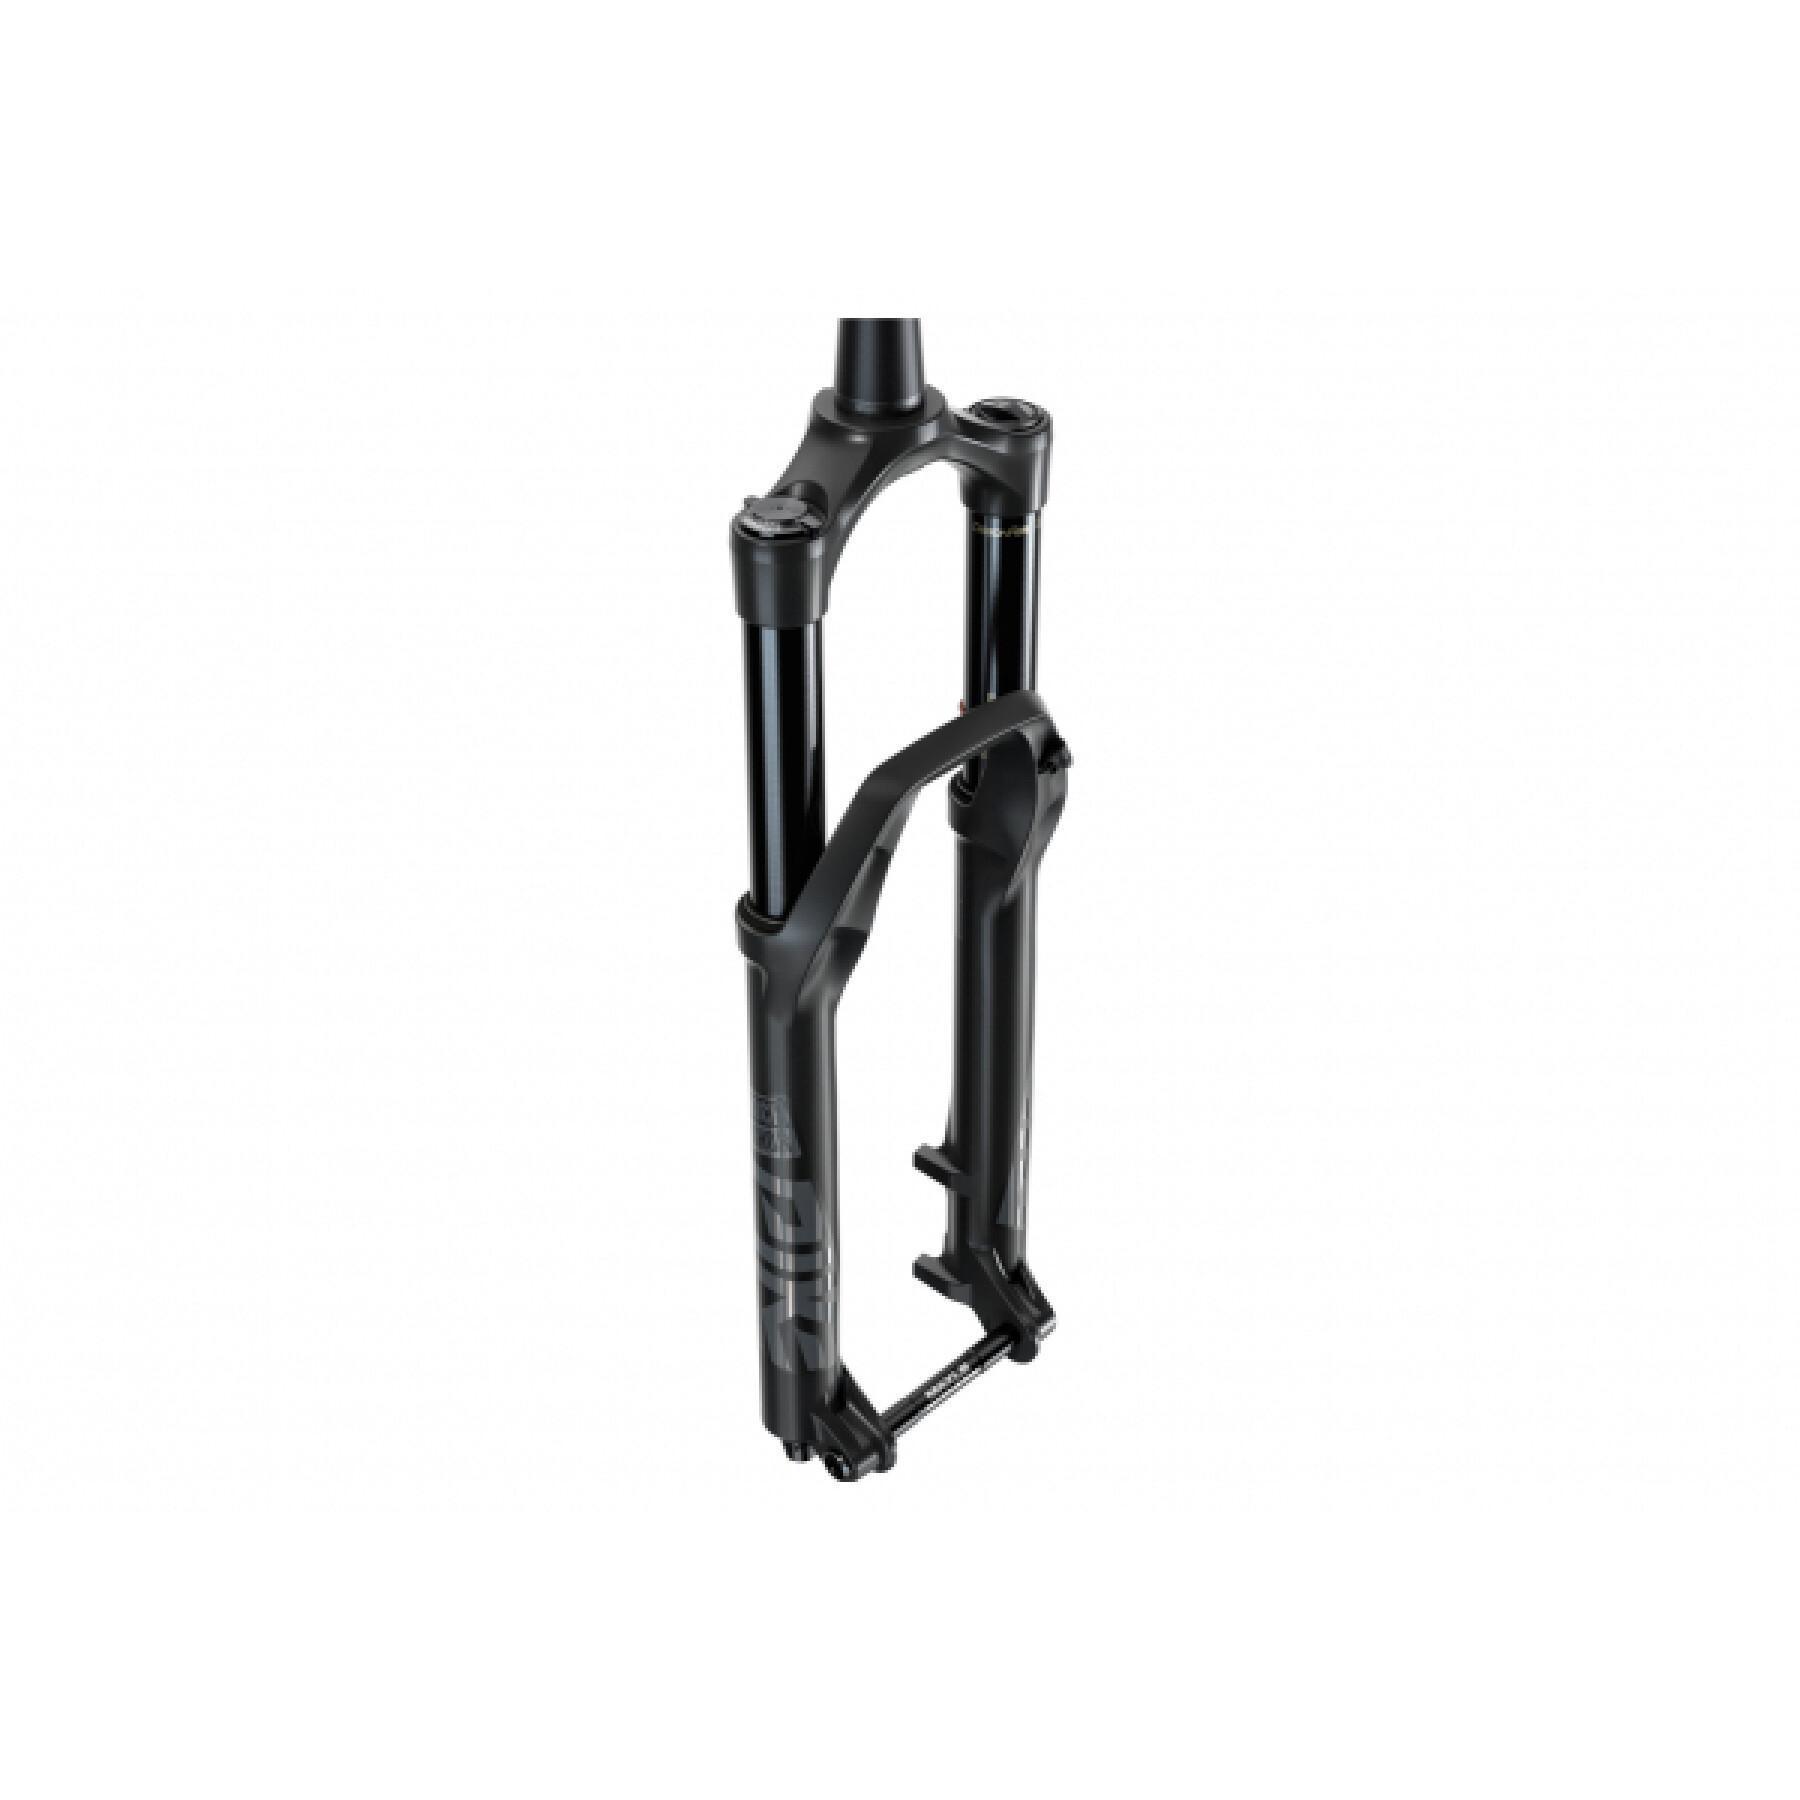 Forcella Rockshox Rs Pike Sel.Ch.Rc 27.5 Boost 140 46Of.Con.Deb.